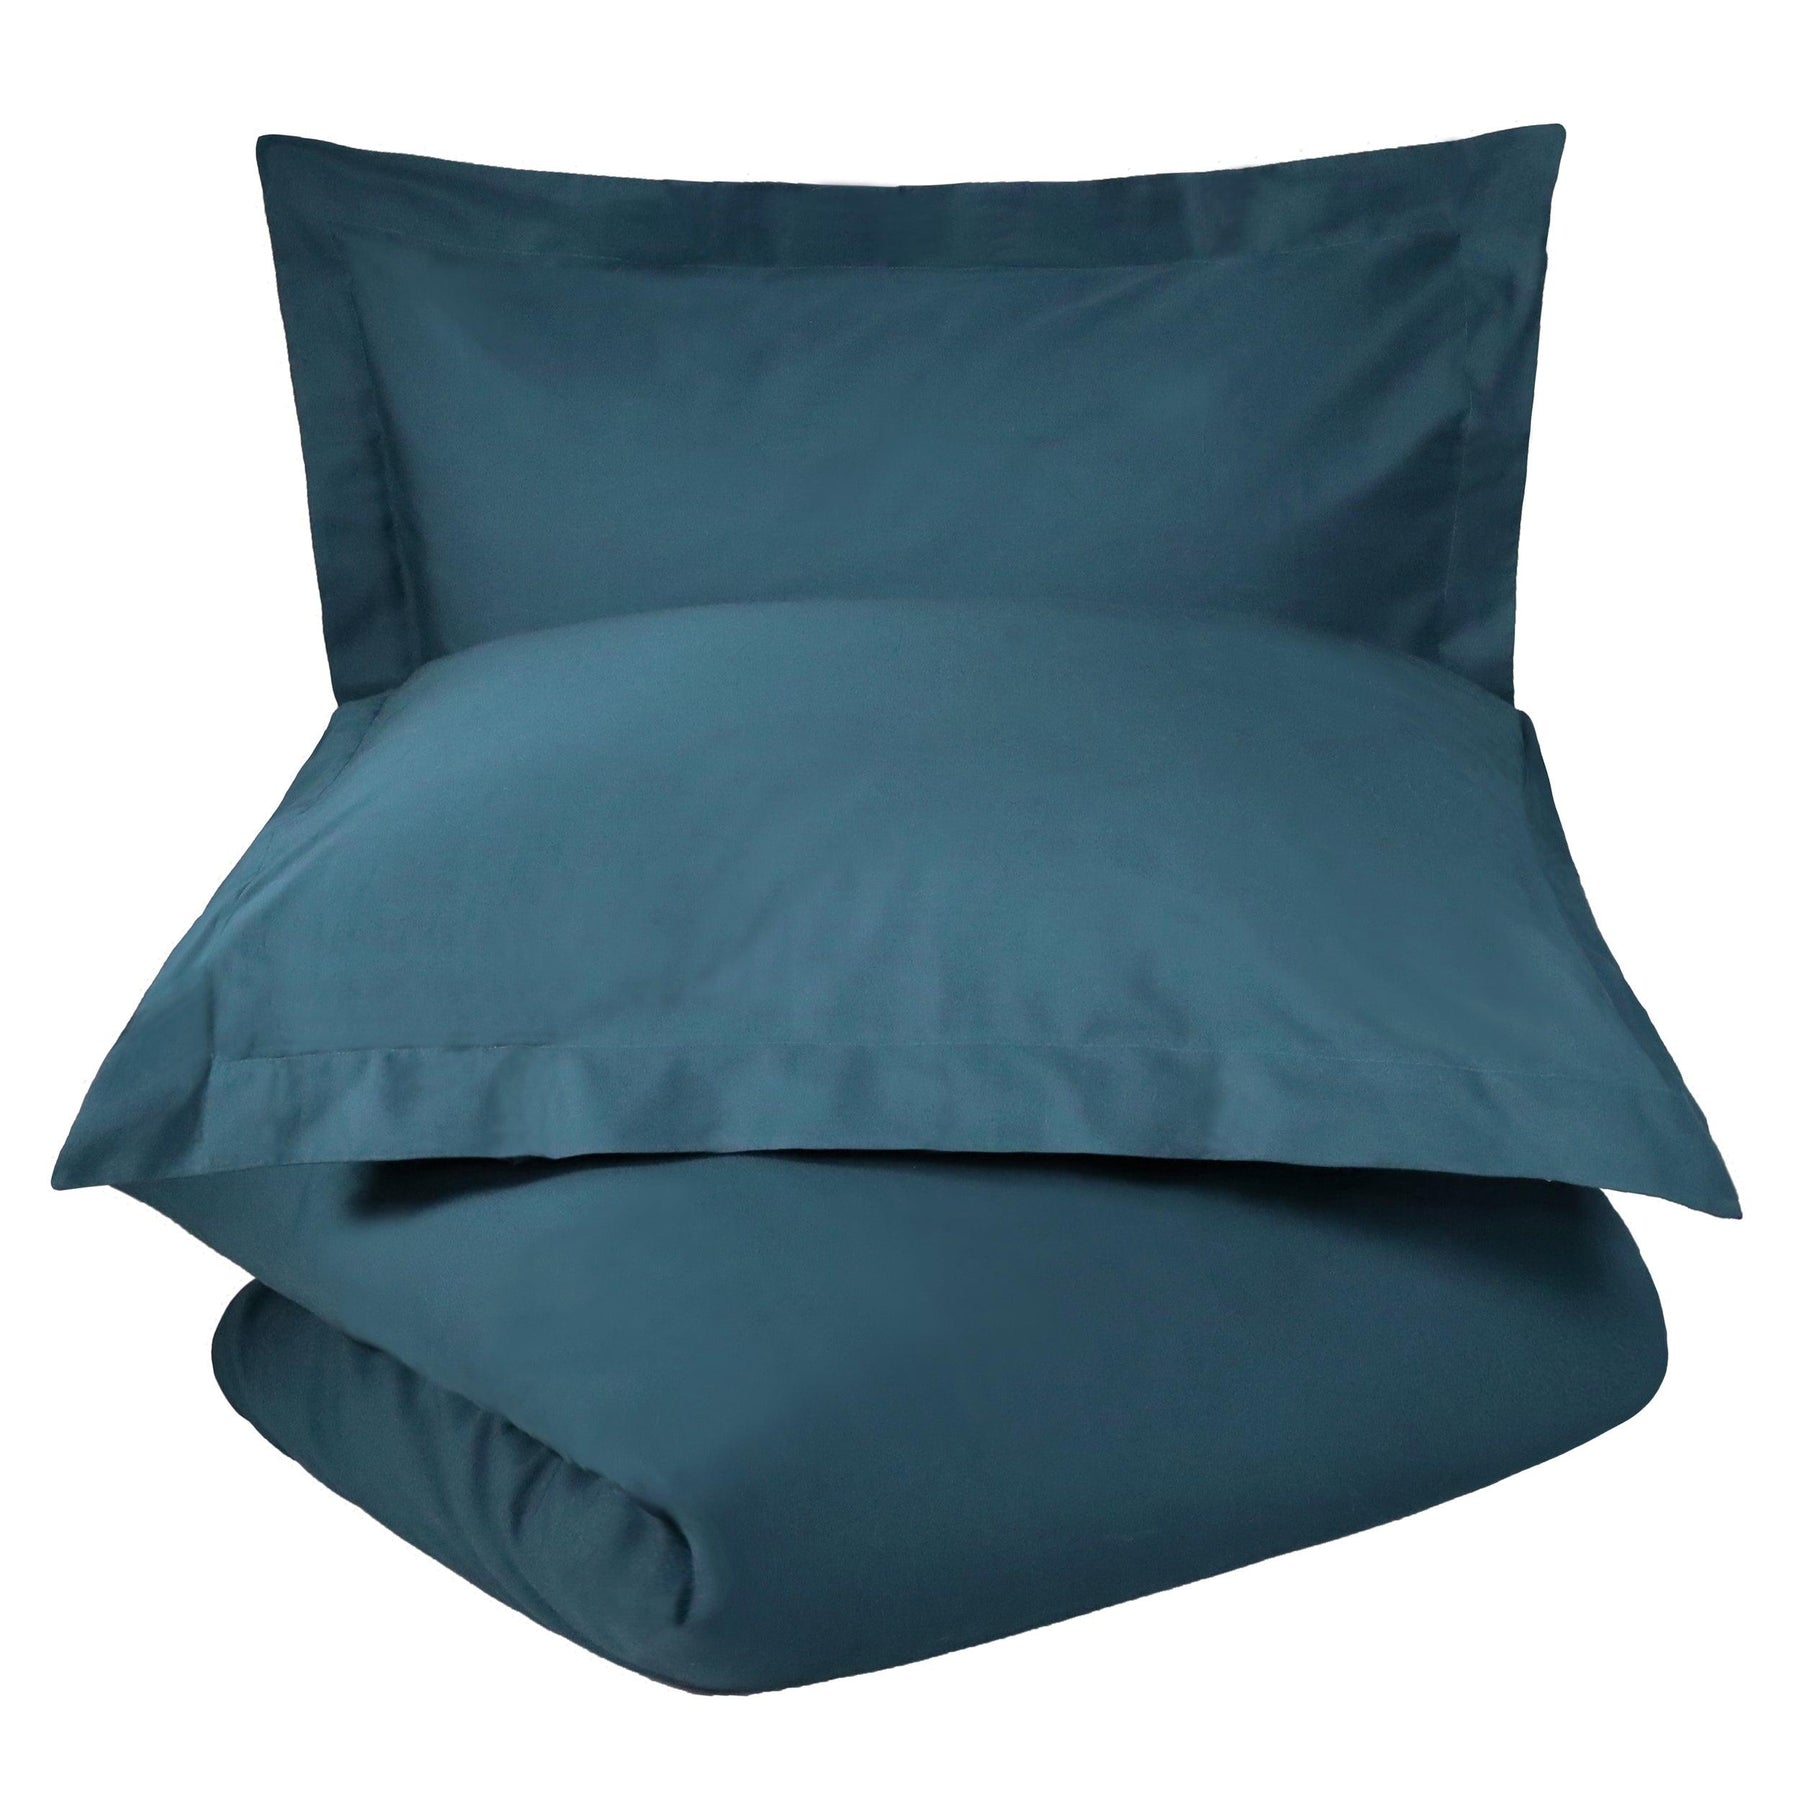 Superior Cotton Percale Modern Traditional Duvet Cover Set - Navy Blue